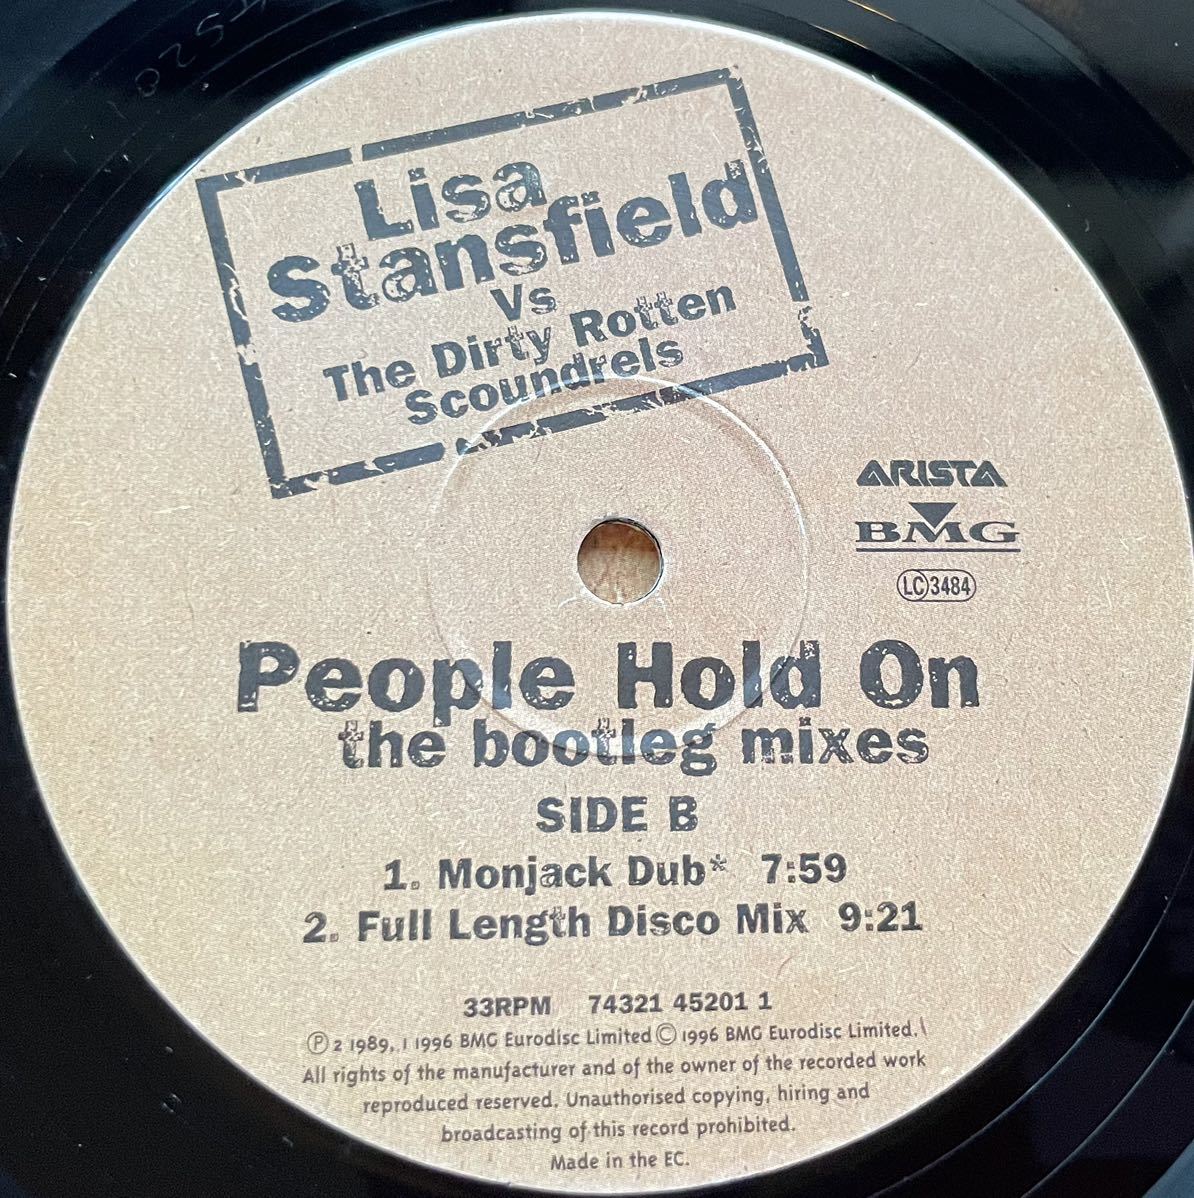 Lisa Stansfield / People Hold On(the boytleg mixes) 12inch盤 その他にもプロモーション盤 レア盤 人気レコード 多数出品。_画像4